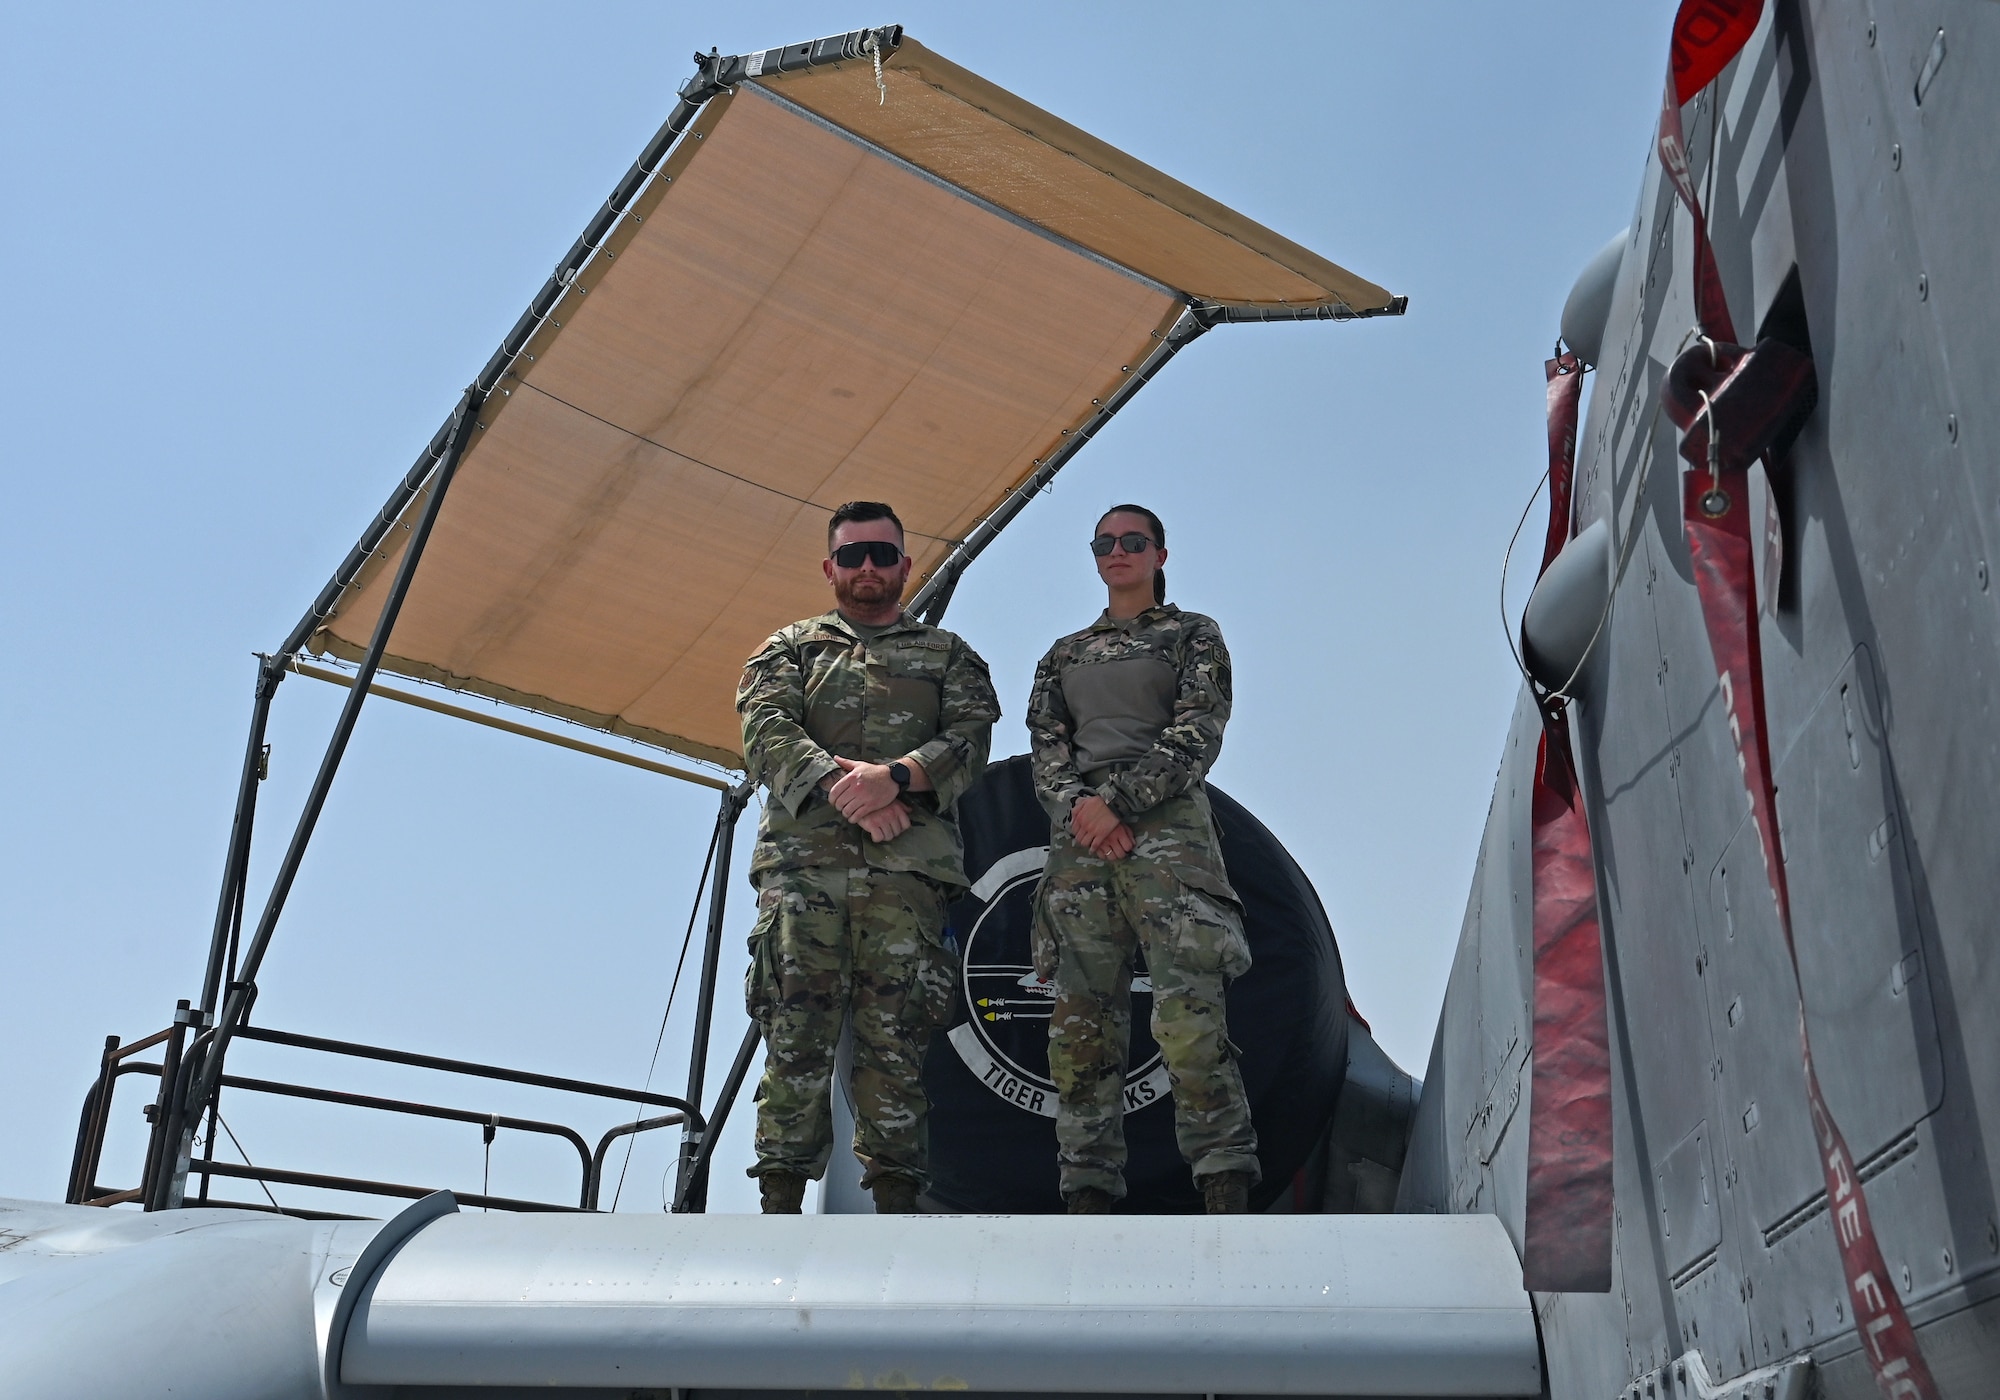 A photo of two people standing on the wing of an aircraft under a sun shade.